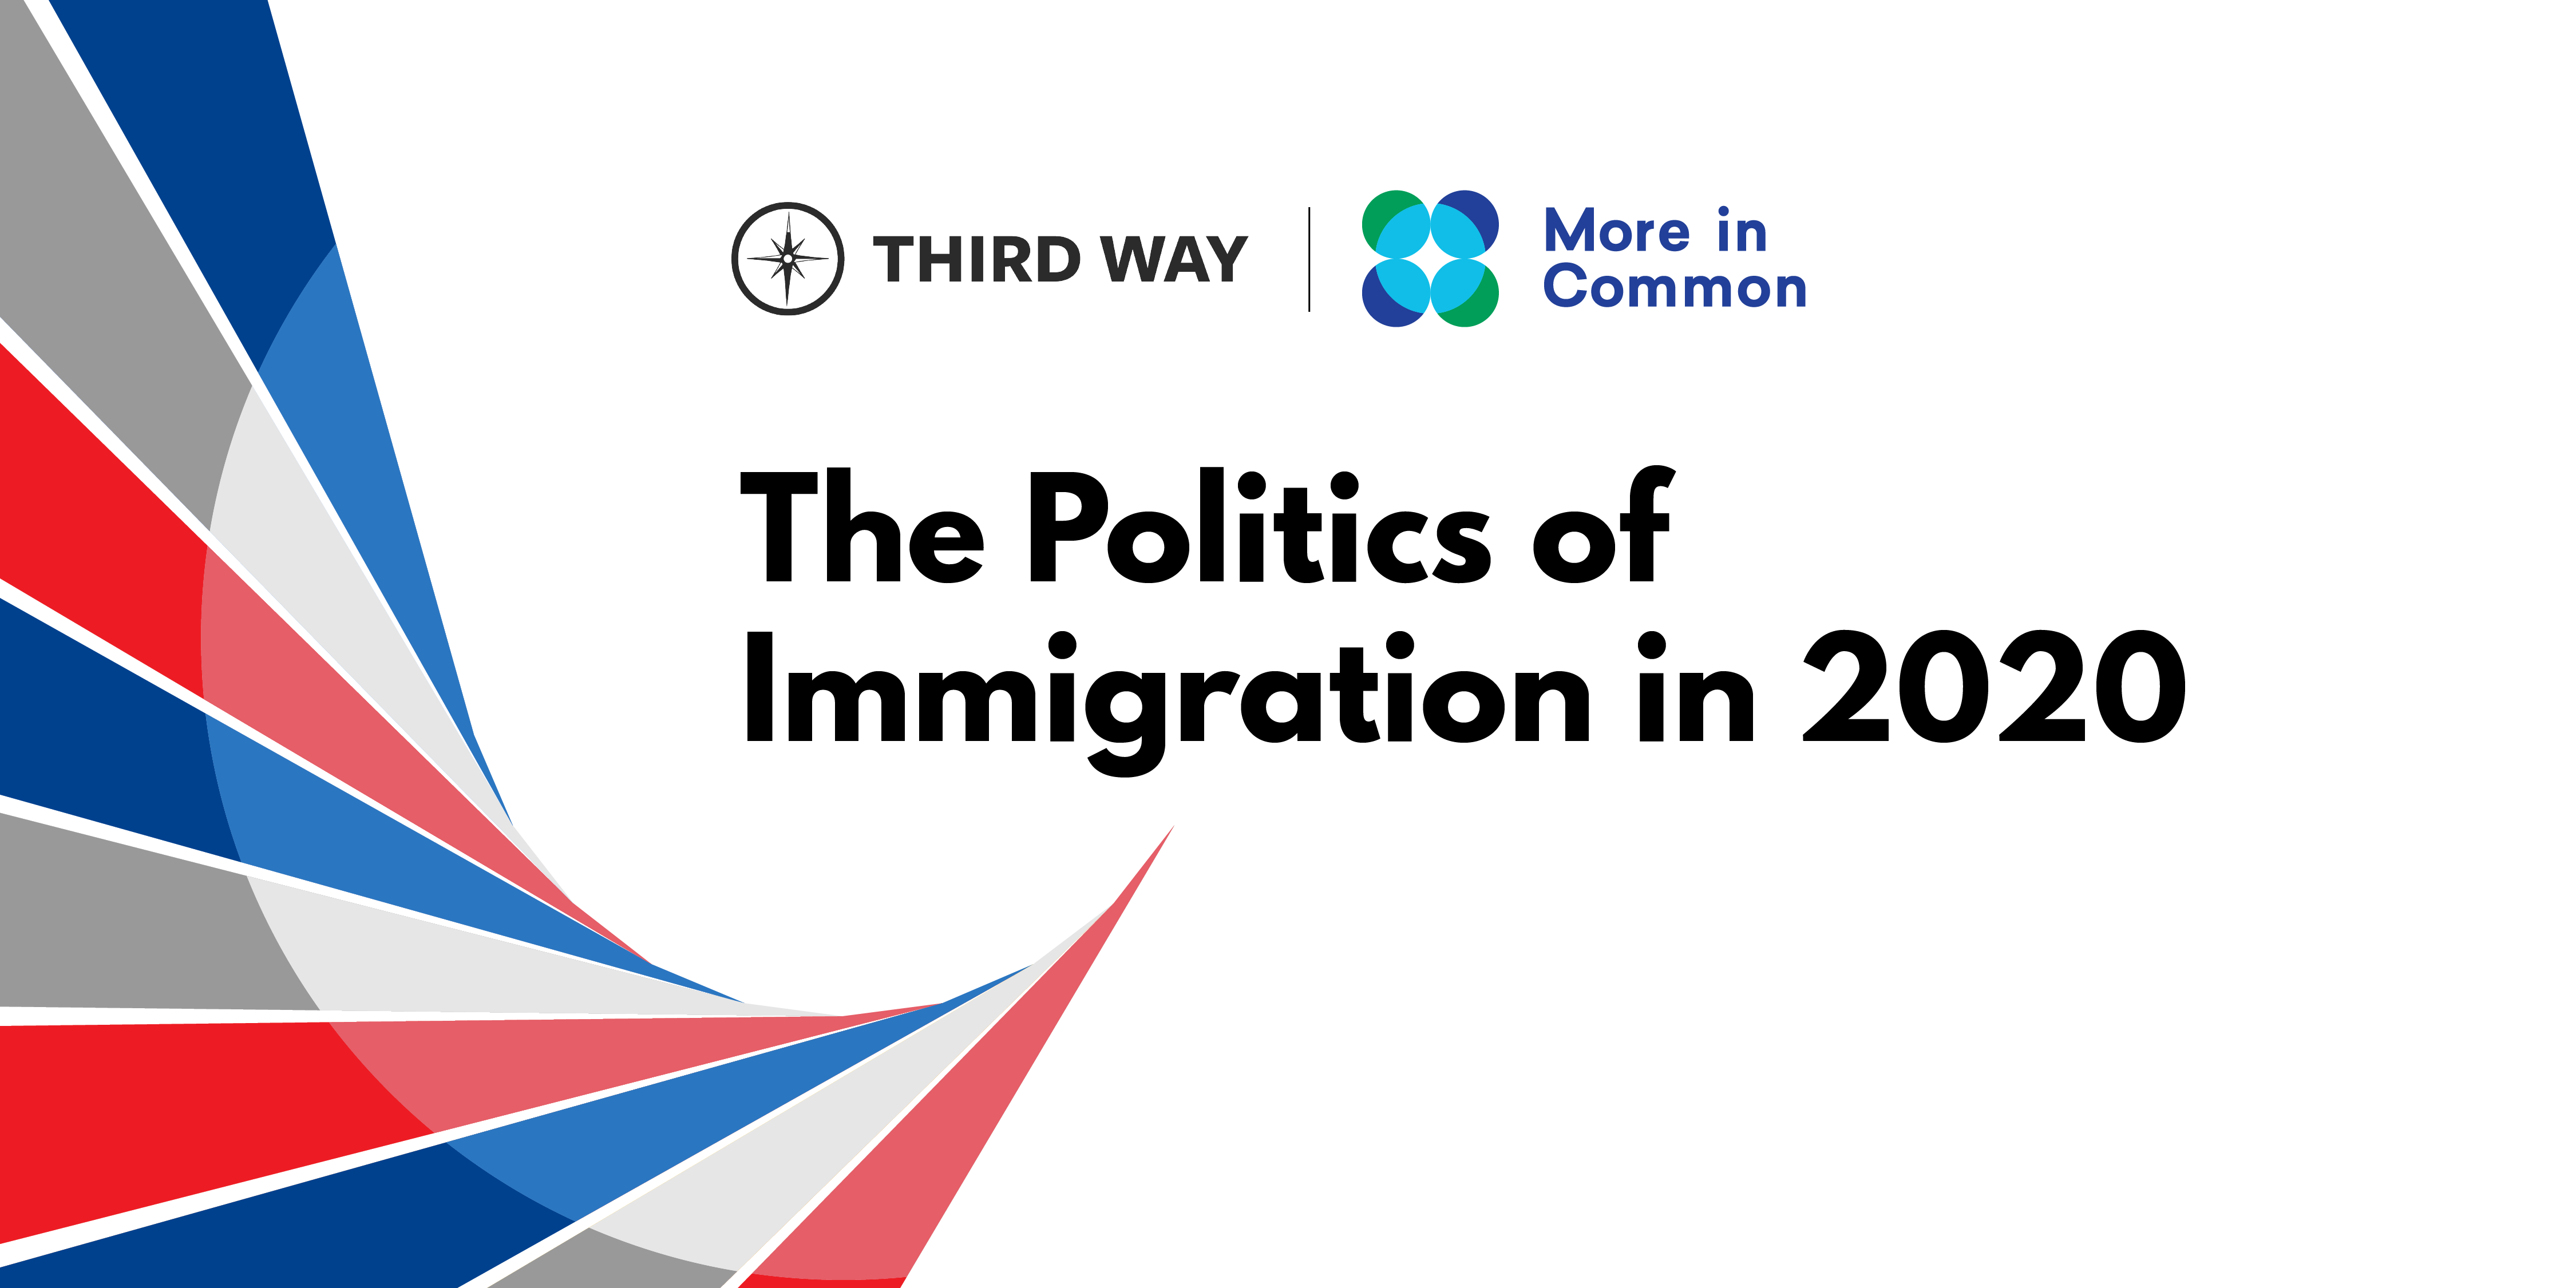 The Politics of Immigration in 2020